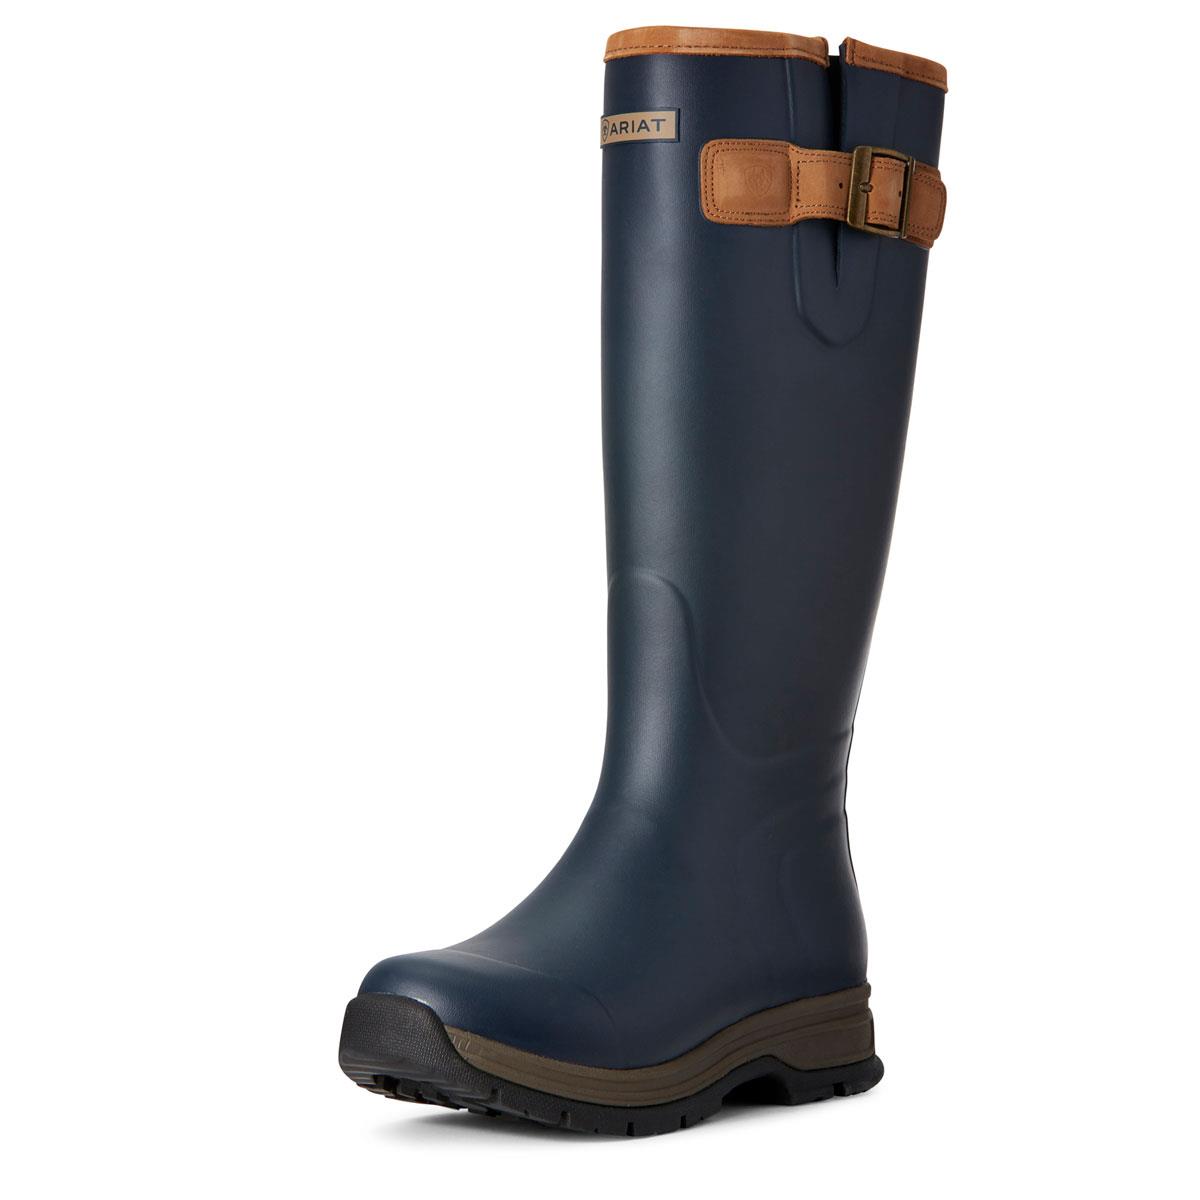 Where are the Ariat Womens Burford Wellington Boots are manufactured?